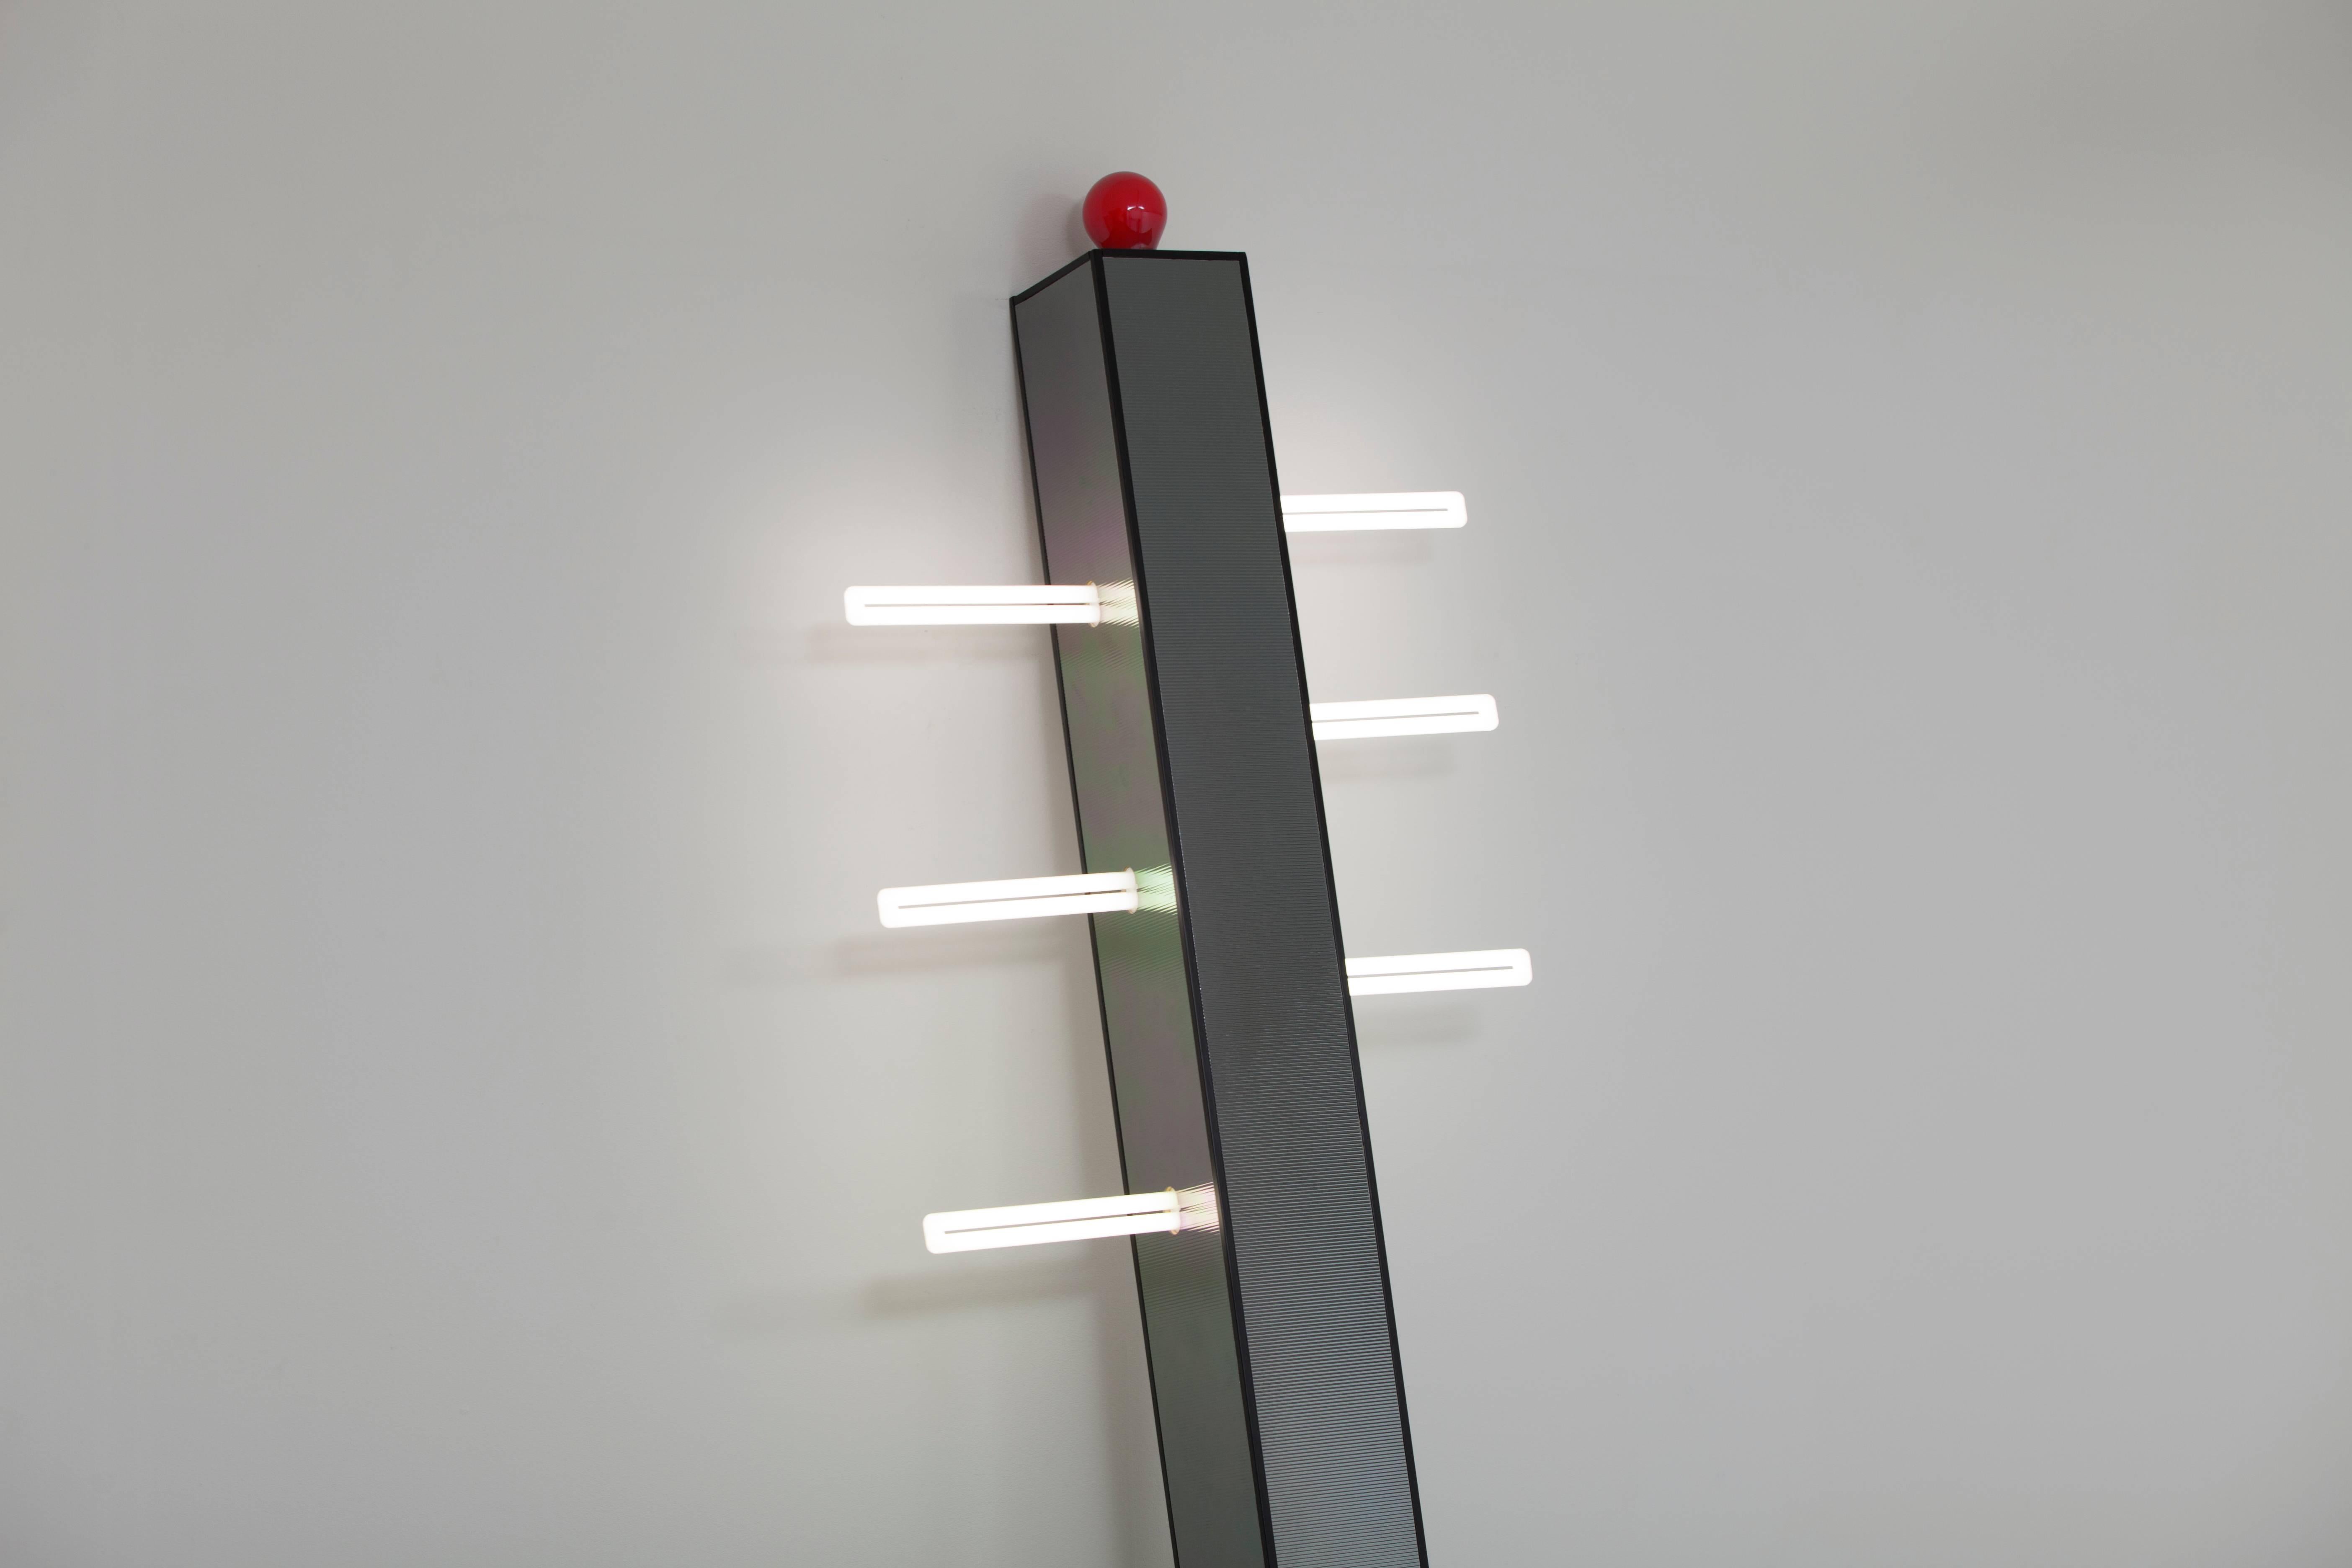 Is it a sculpture or a floor lamp? The Gala lamp designed by Ettore Sottsass for the Mobili Lunghi exhibition illustrates this recurring question dear to our hearts at A1043. Gala plays on two aspects key to lighting, the verticality and the light